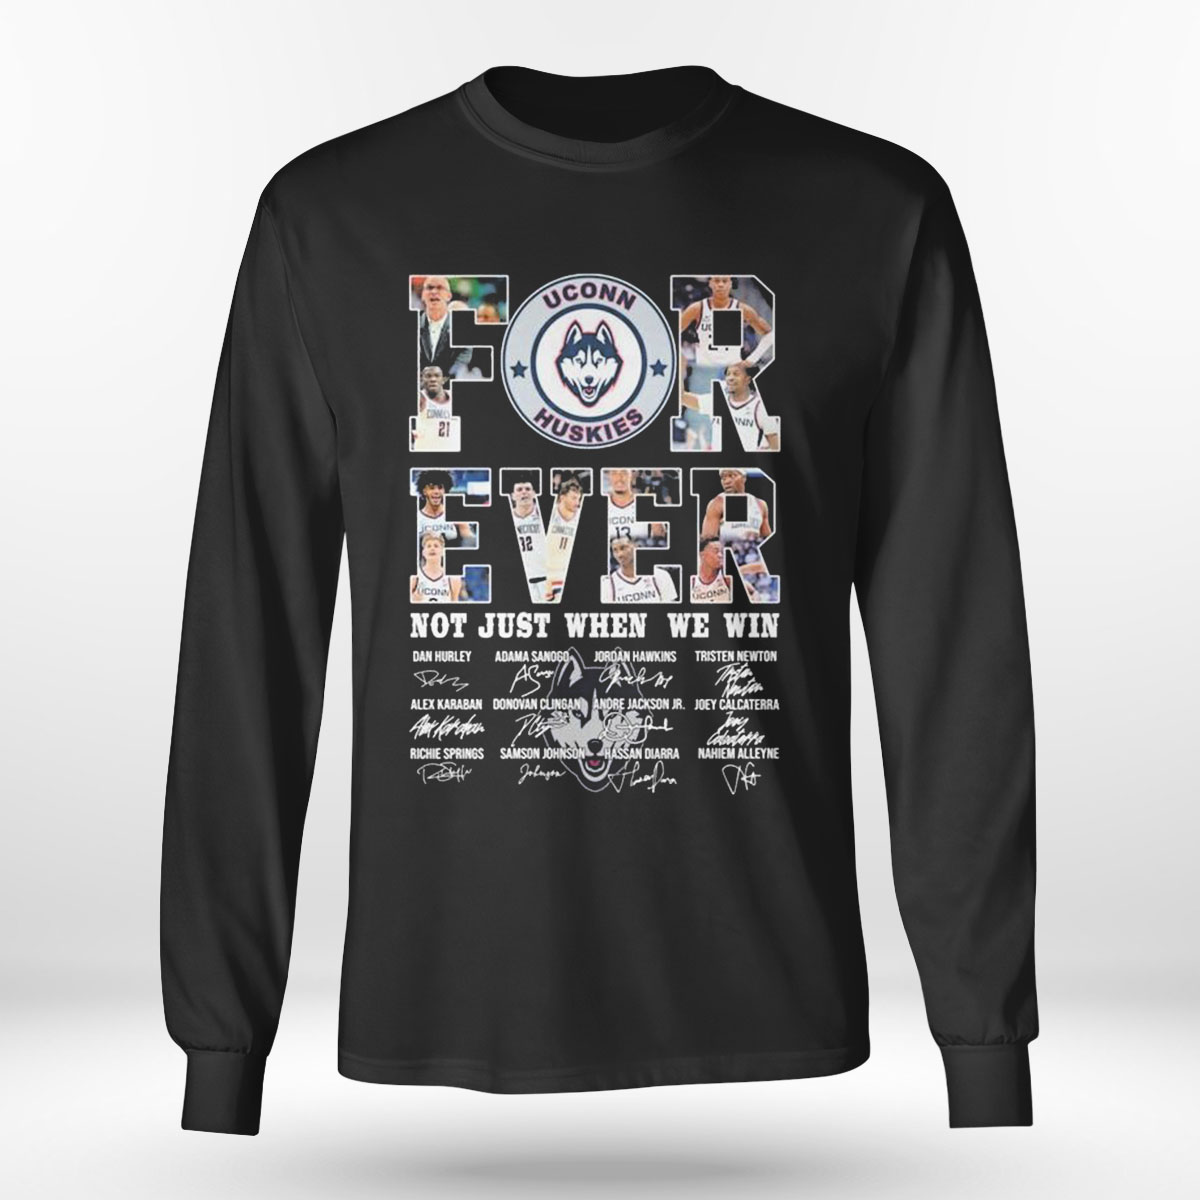 Uconn Mens Basketball Forever Not Just When We Win Signatures T-shirt